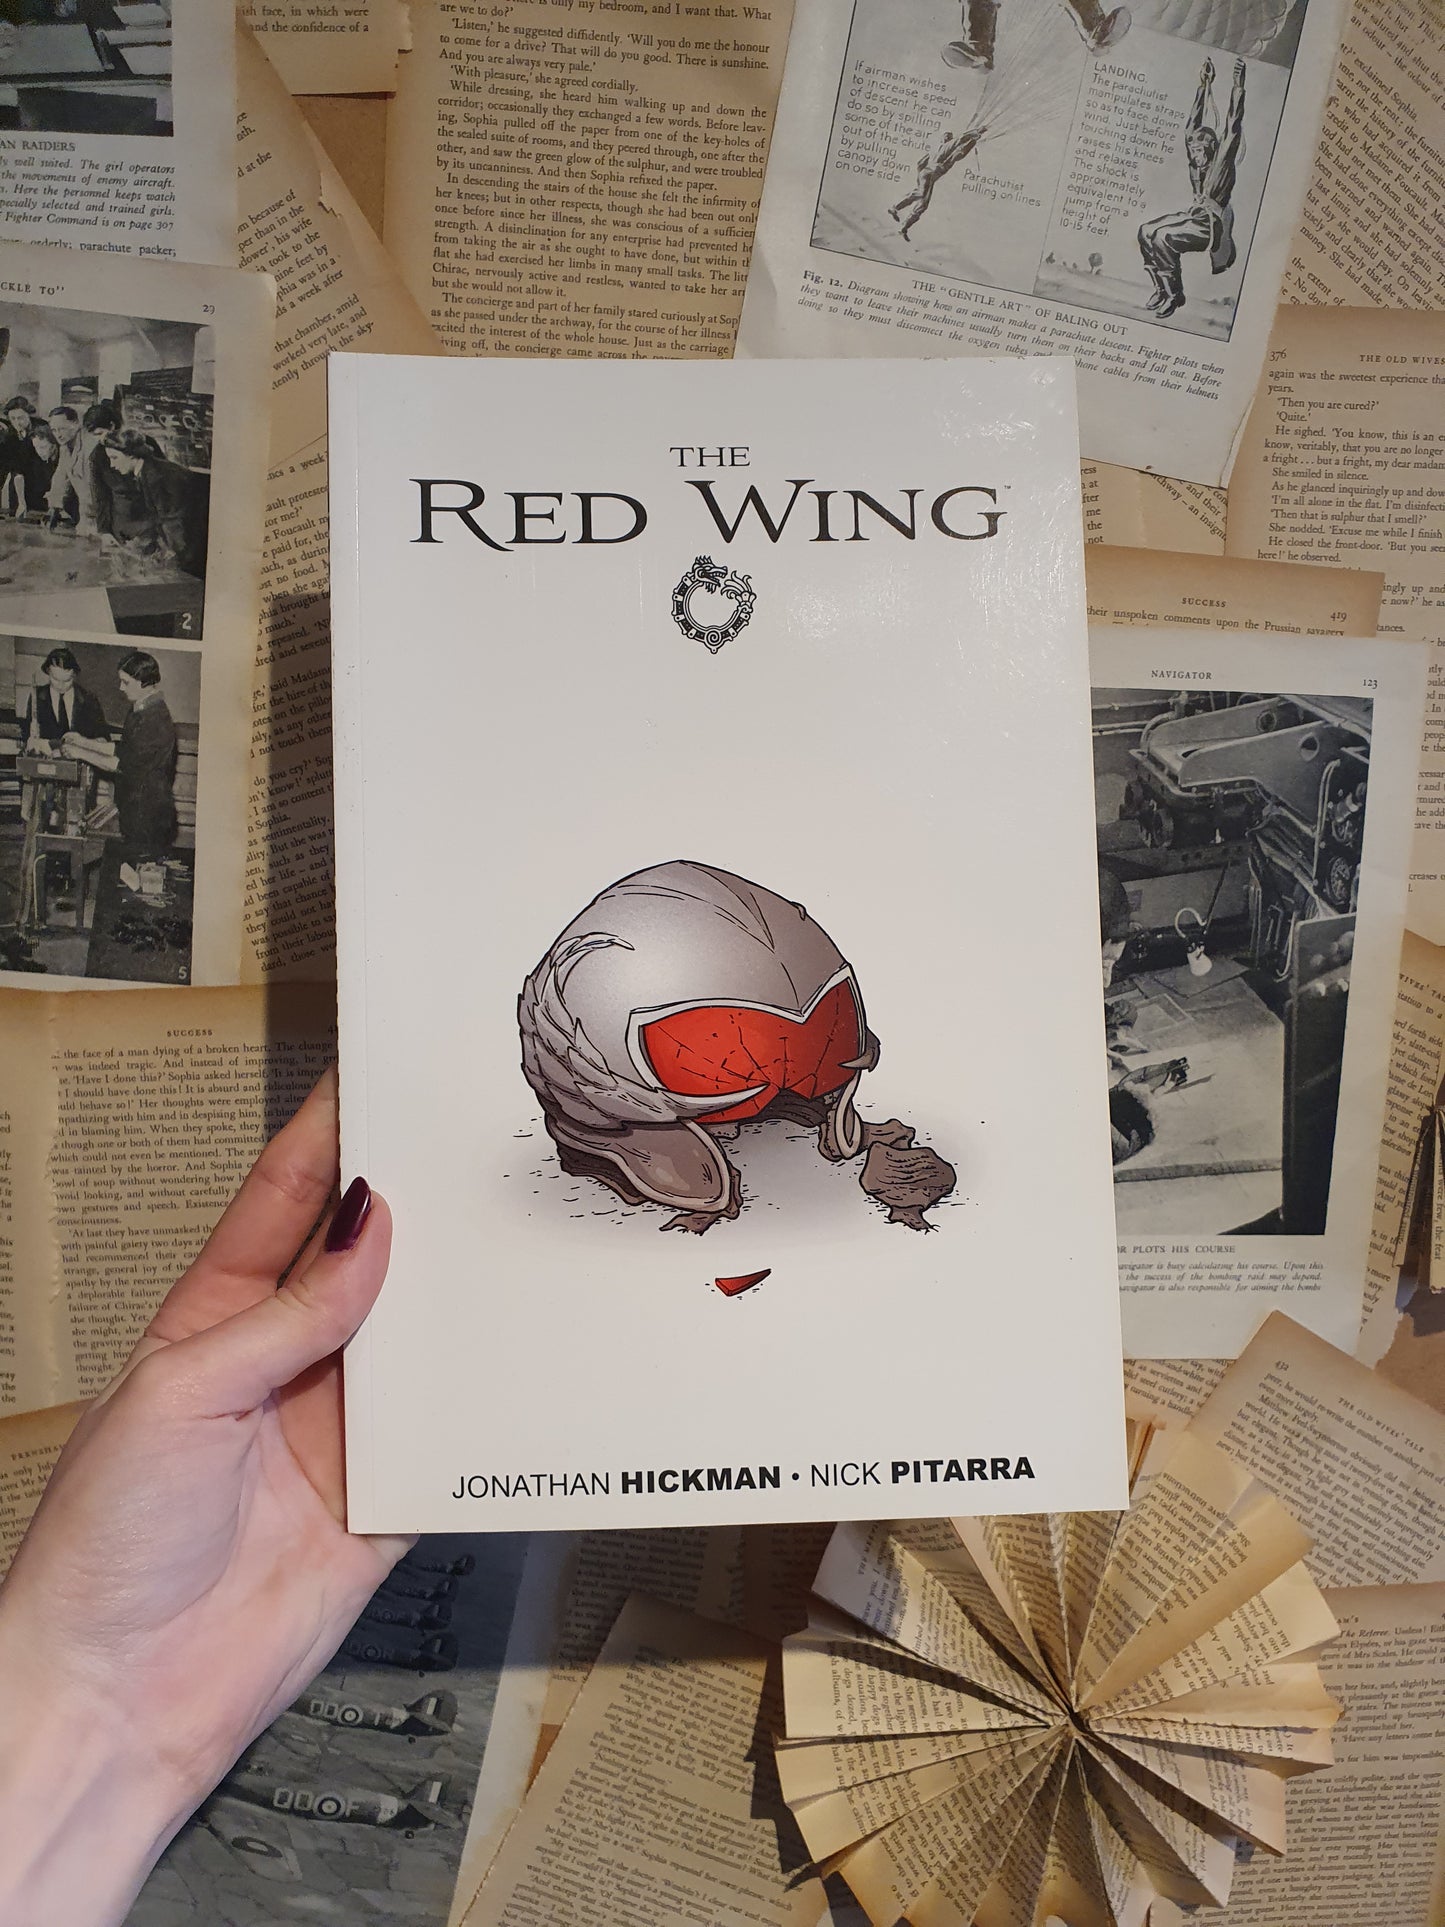 The Red Wing by Hickman & Pitarra (2011)